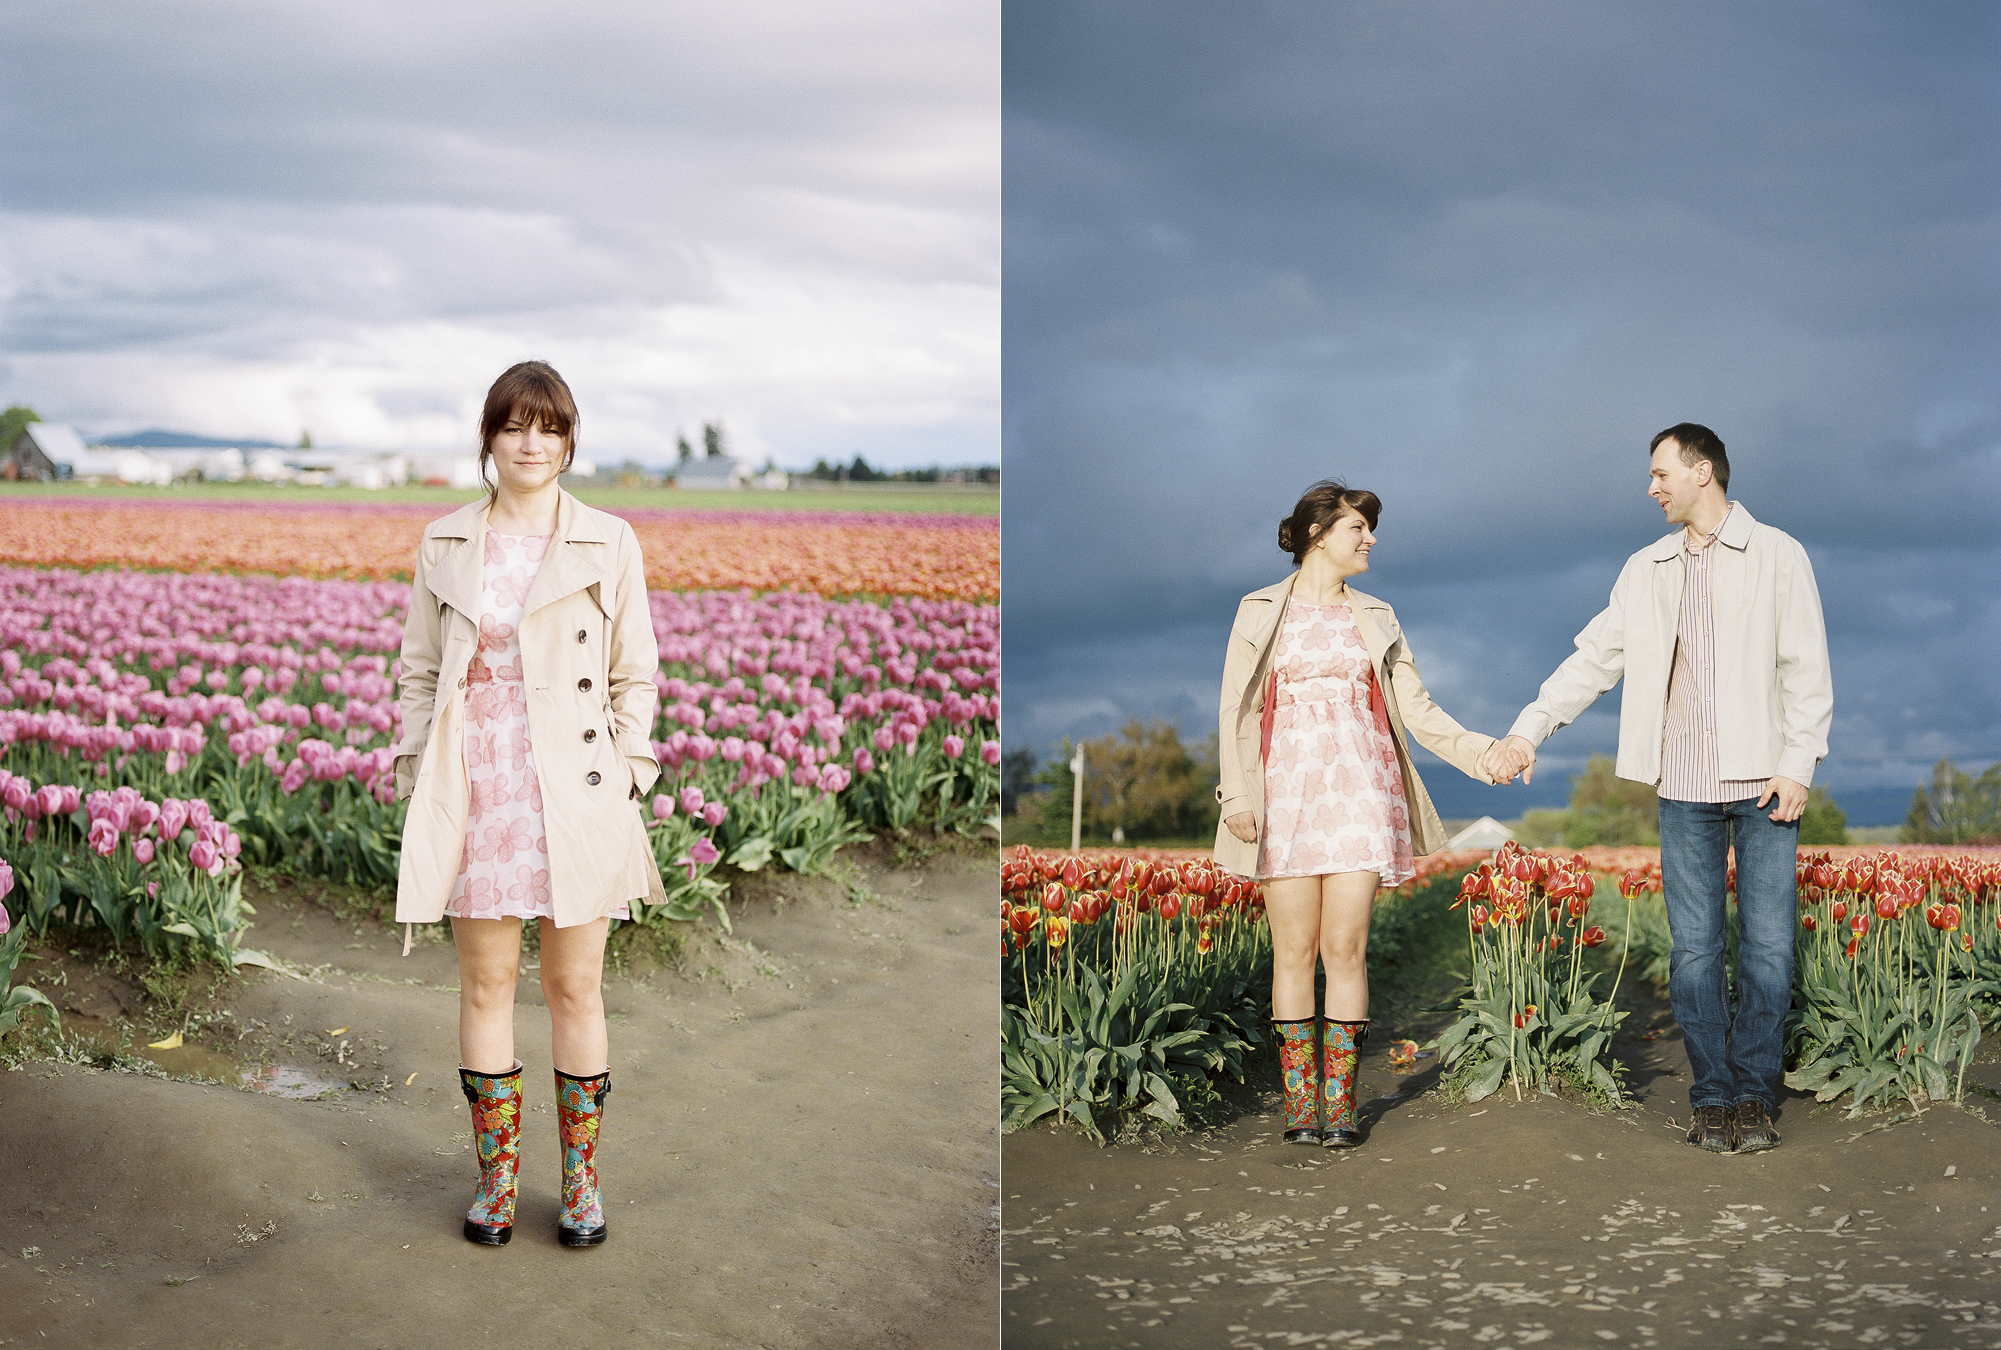 Colorful tulip festival engagement session at Roozengarde in the Skagit Valley